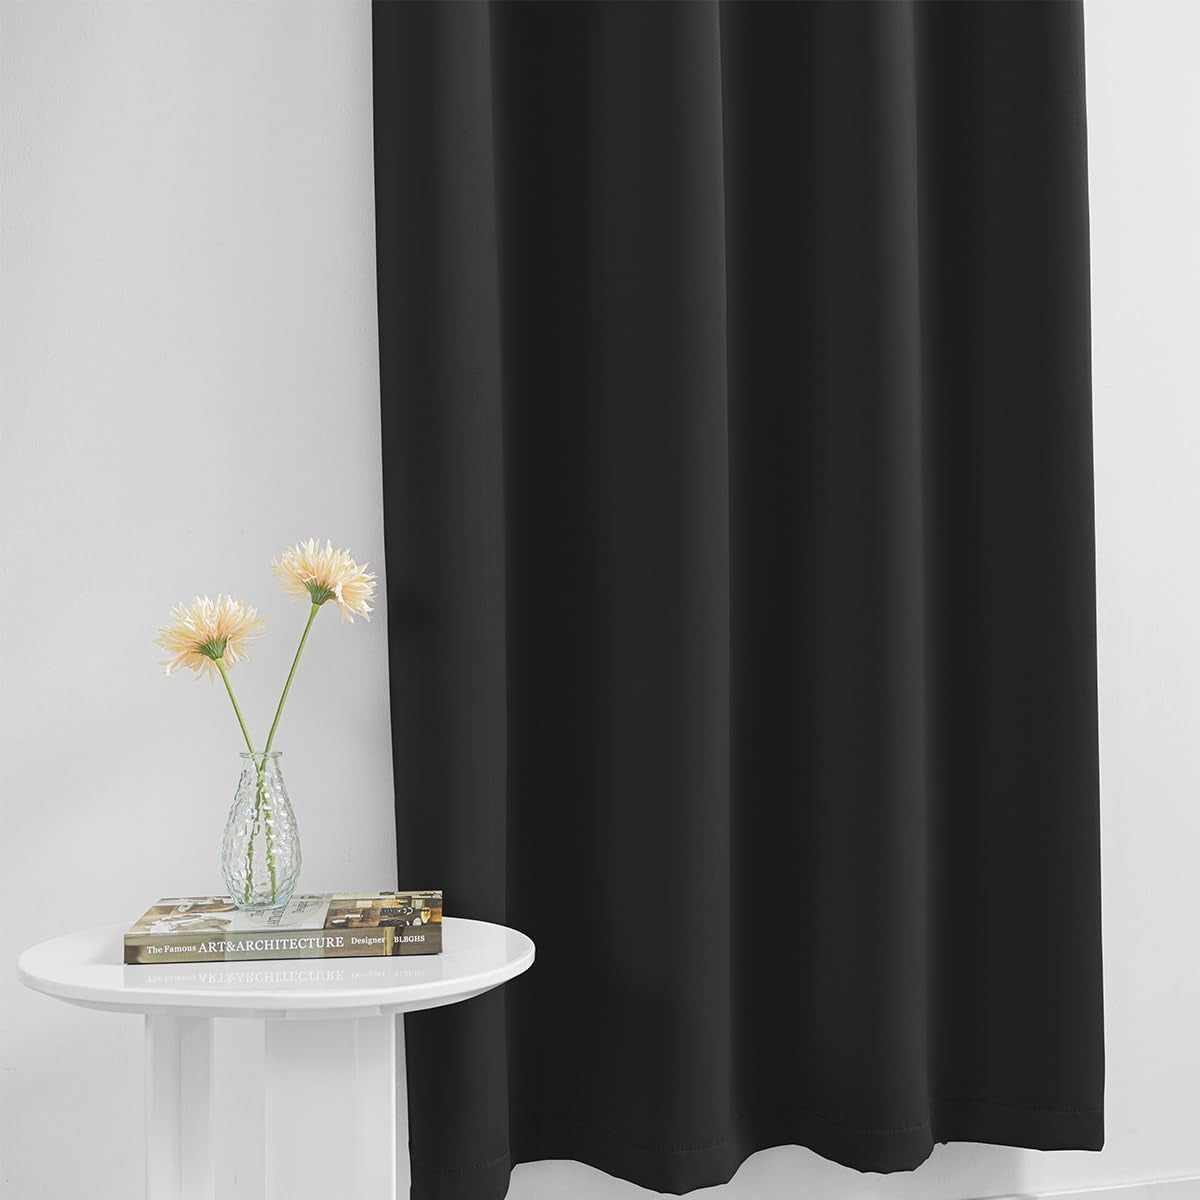 Muamar 2Pcs Blackout Curtains Privacy Curtains 63 Inch Length Window Curtains,Easy Install Thermal Insulated Window Shades,Stick Curtains No Rods, Black 42" W X 63" L  Muamar   